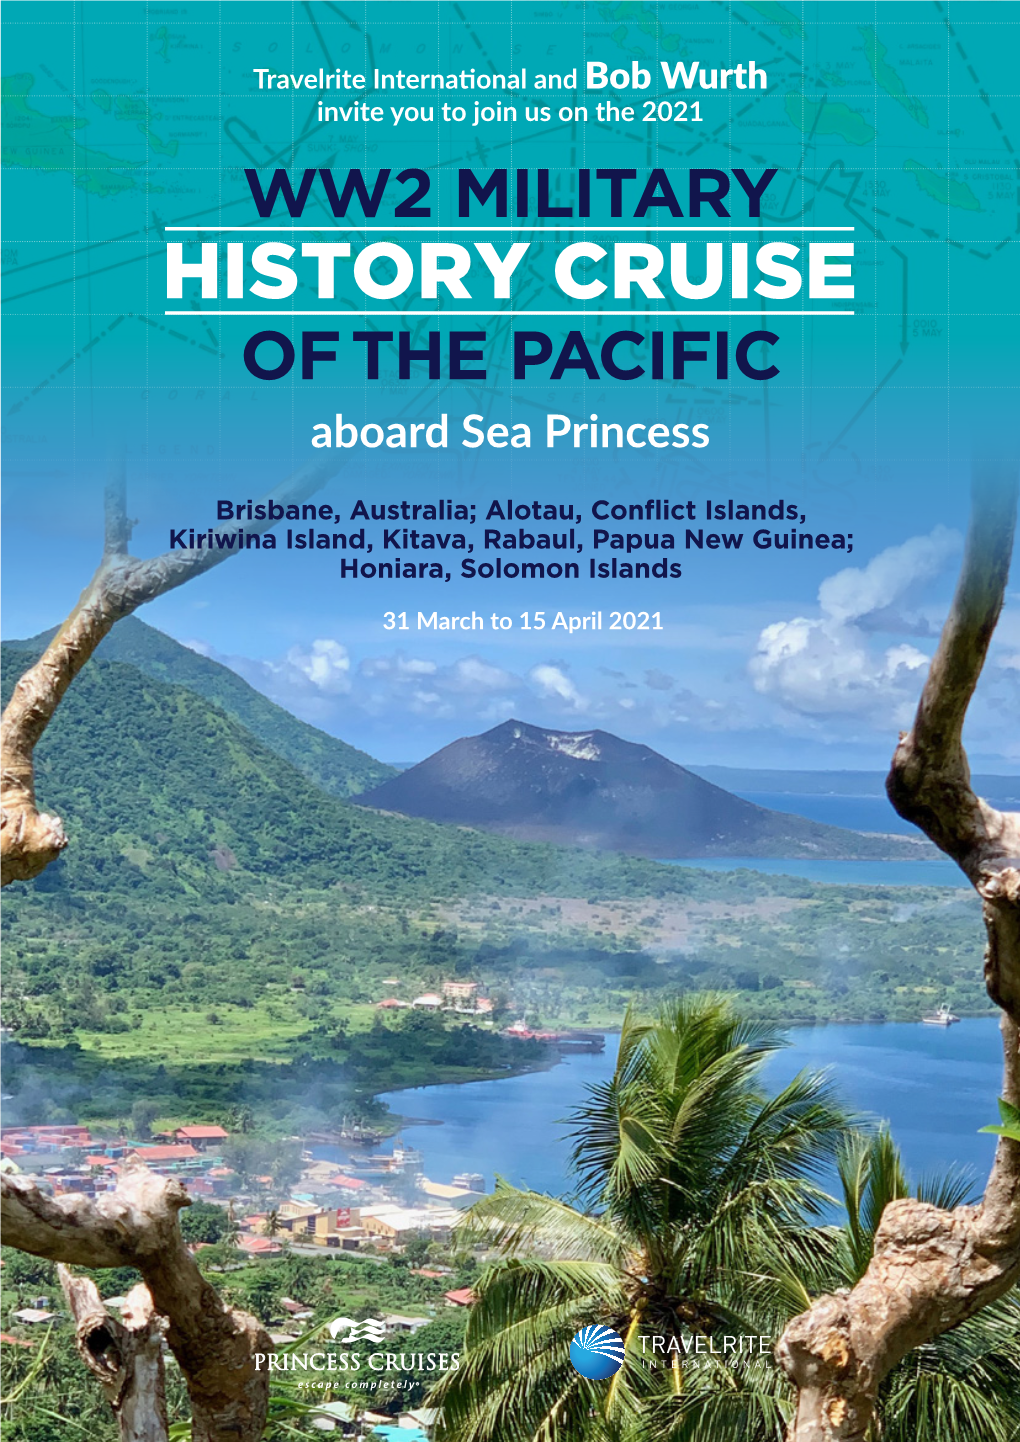 HISTORY CRUISE of the PACIFIC Aboard Sea Princess